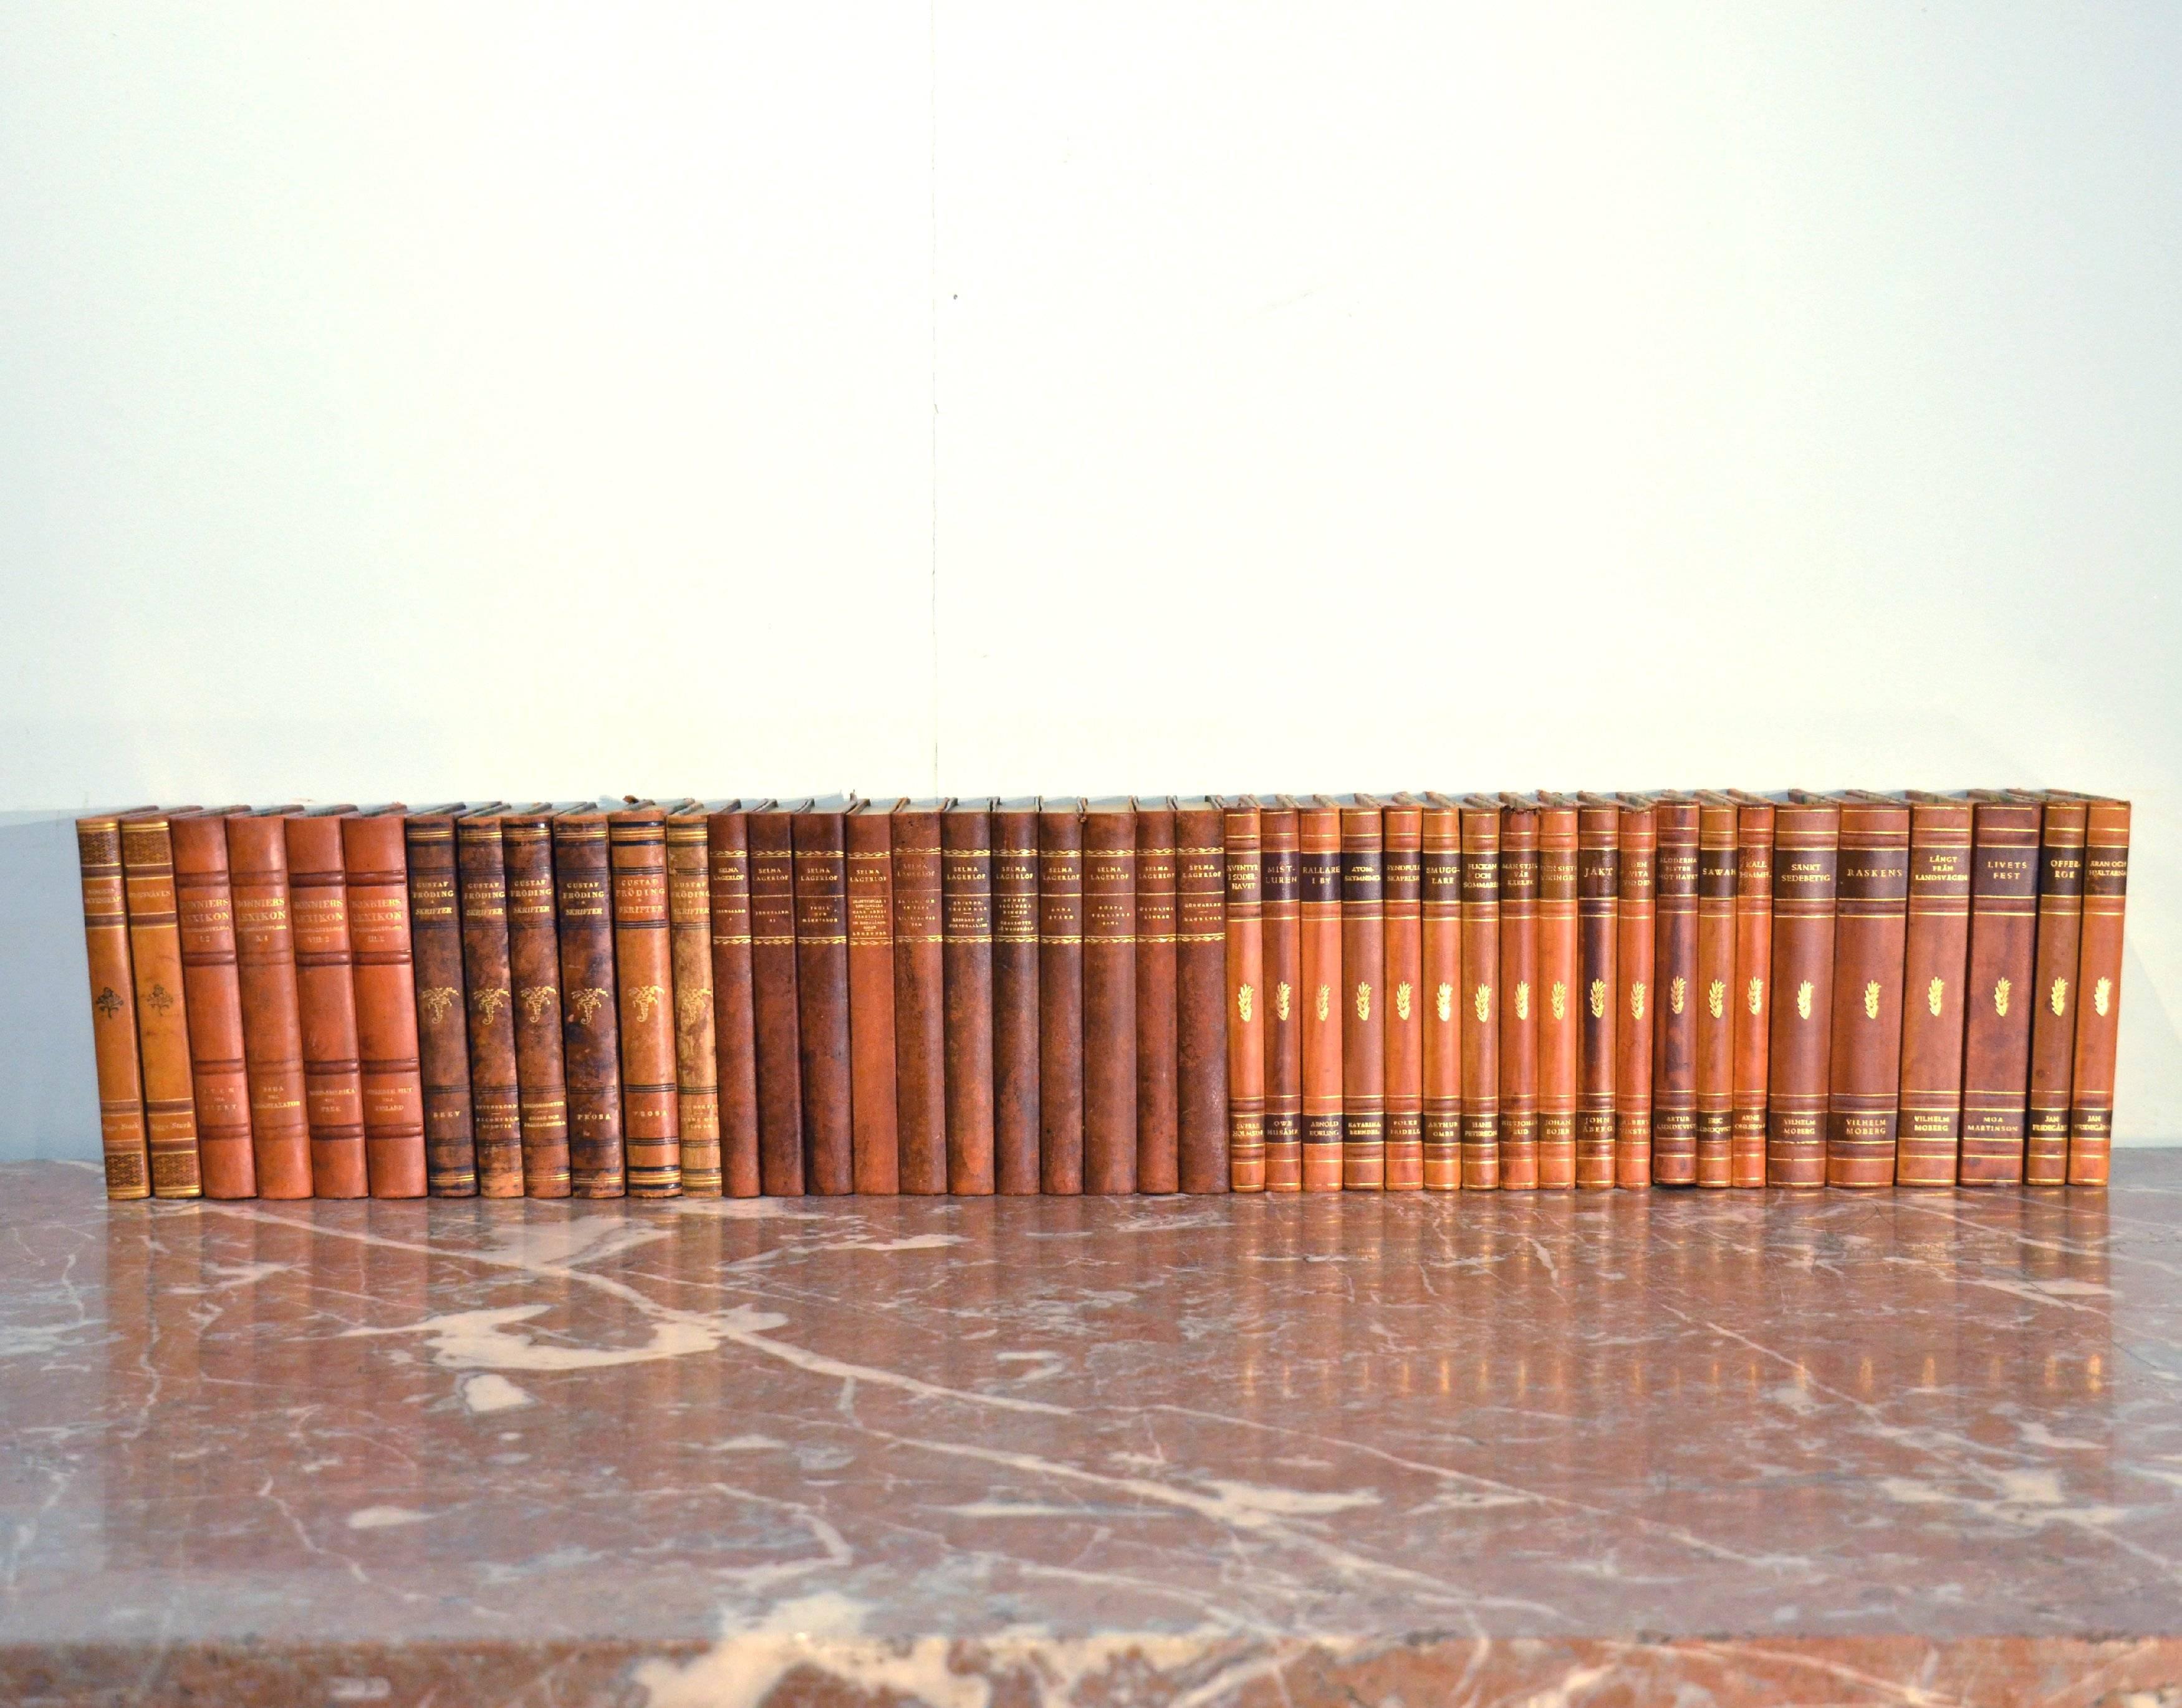 Embossed Collection of Leather Bound Books, Series 110